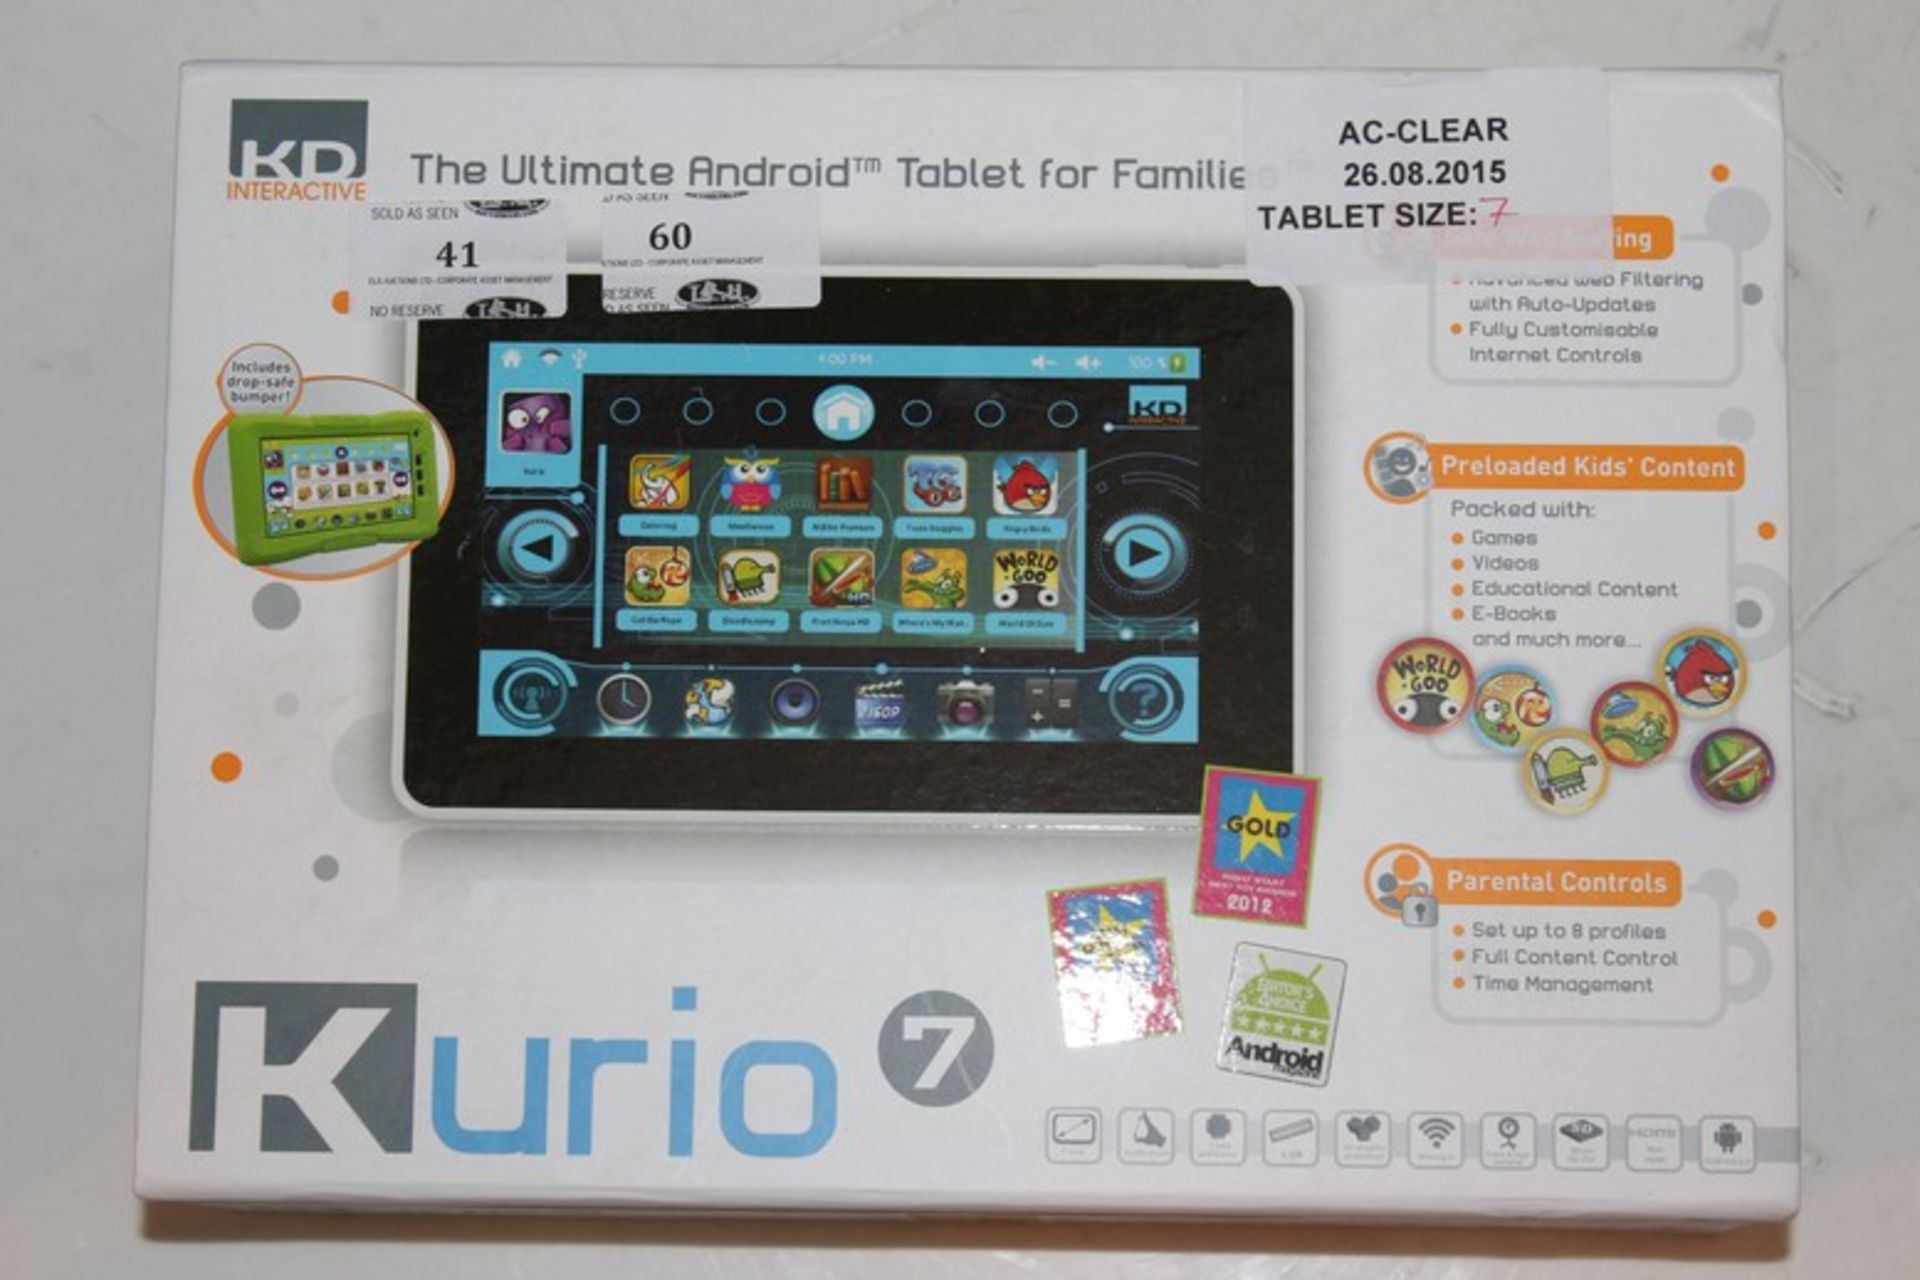 1 x BOXED KD INTERACTIVE CURIO 7 THE ULTIMATE ANDROID TABLET FOR FAMILIES WITH ANDROID 4.0 OPERATING